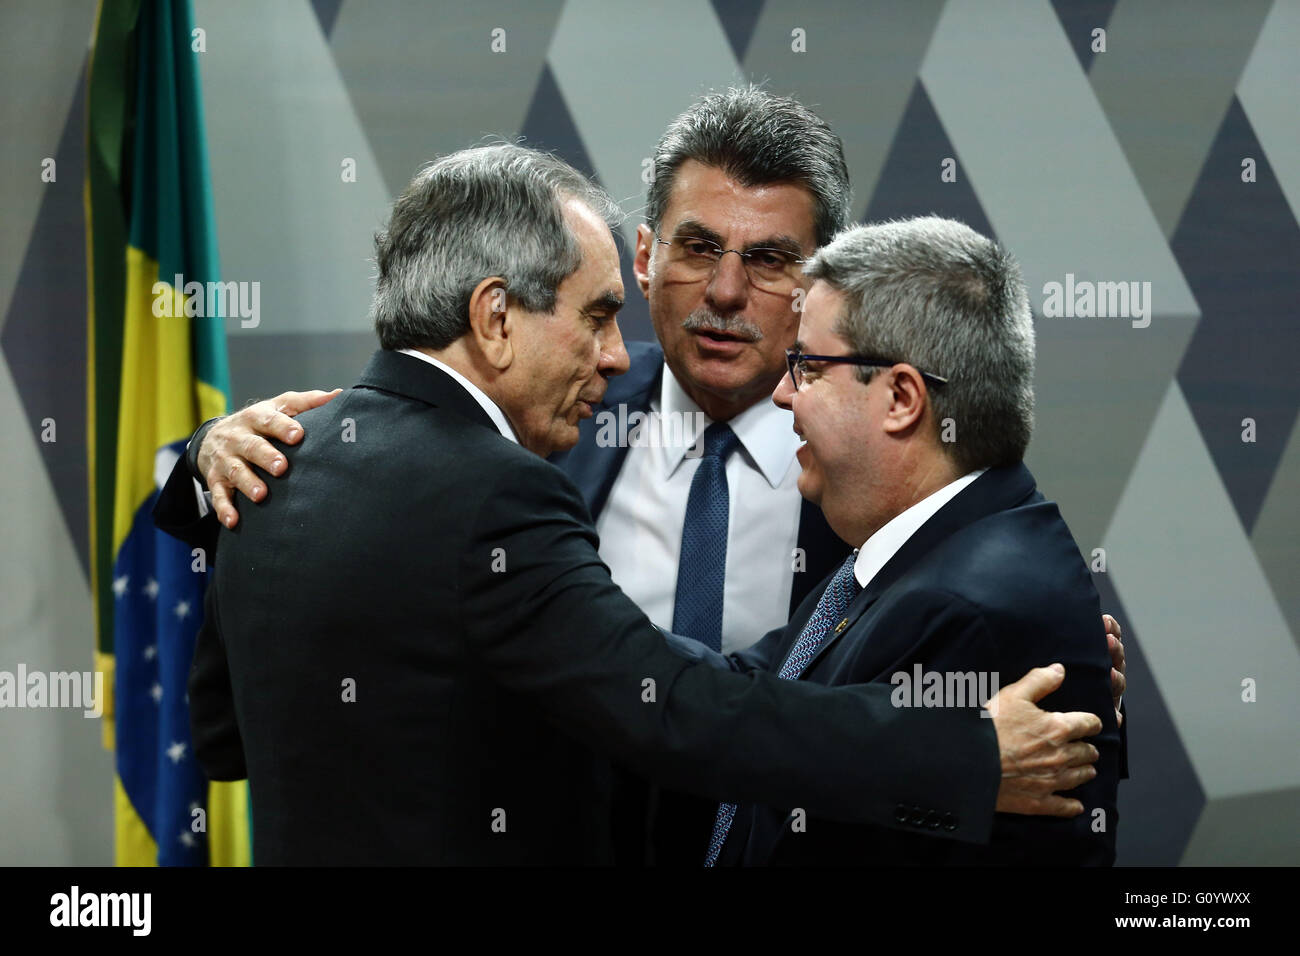 (160506) -- BRASILIA, May 6, 2016 (Xinhua) -- Senator Raimundo Lira (L), member of Brazilian Democratic Movement Party (PMDB) and the president of a special senate committee that will consider Brazil's President Dilma Rousseff's impeachment, Senator Romero Juca (C) from PMDB, and Senator Antonio Anastasia (R), member of Brazilian Social Democratic Party (PSDB) and the rapporteur of the committee, have talks during the vote session of the report on impeachment proceedings in Brasilia, Brazil, on May 6, 2016. A Brazilian Senate committee voted on Fiday in favor of opening an impeachment against Stock Photo